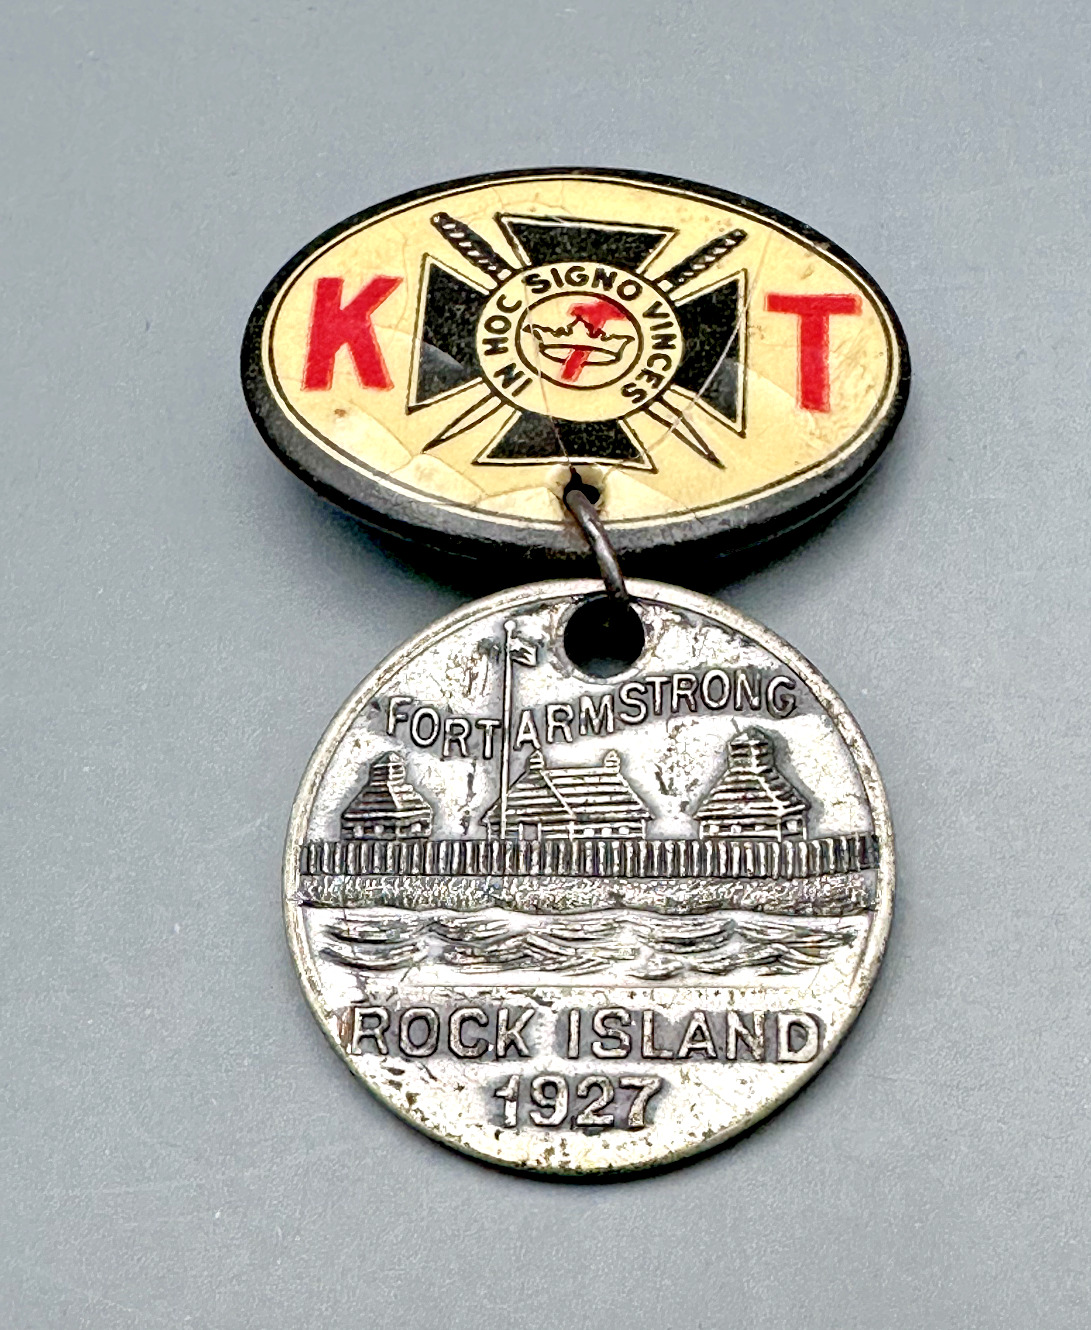 1927 KNIGHTS TEMPLAR 71ST ANNUAL GRAND CONCLAVE FORT ARMSTRONG PIN BUTTON MEDAL